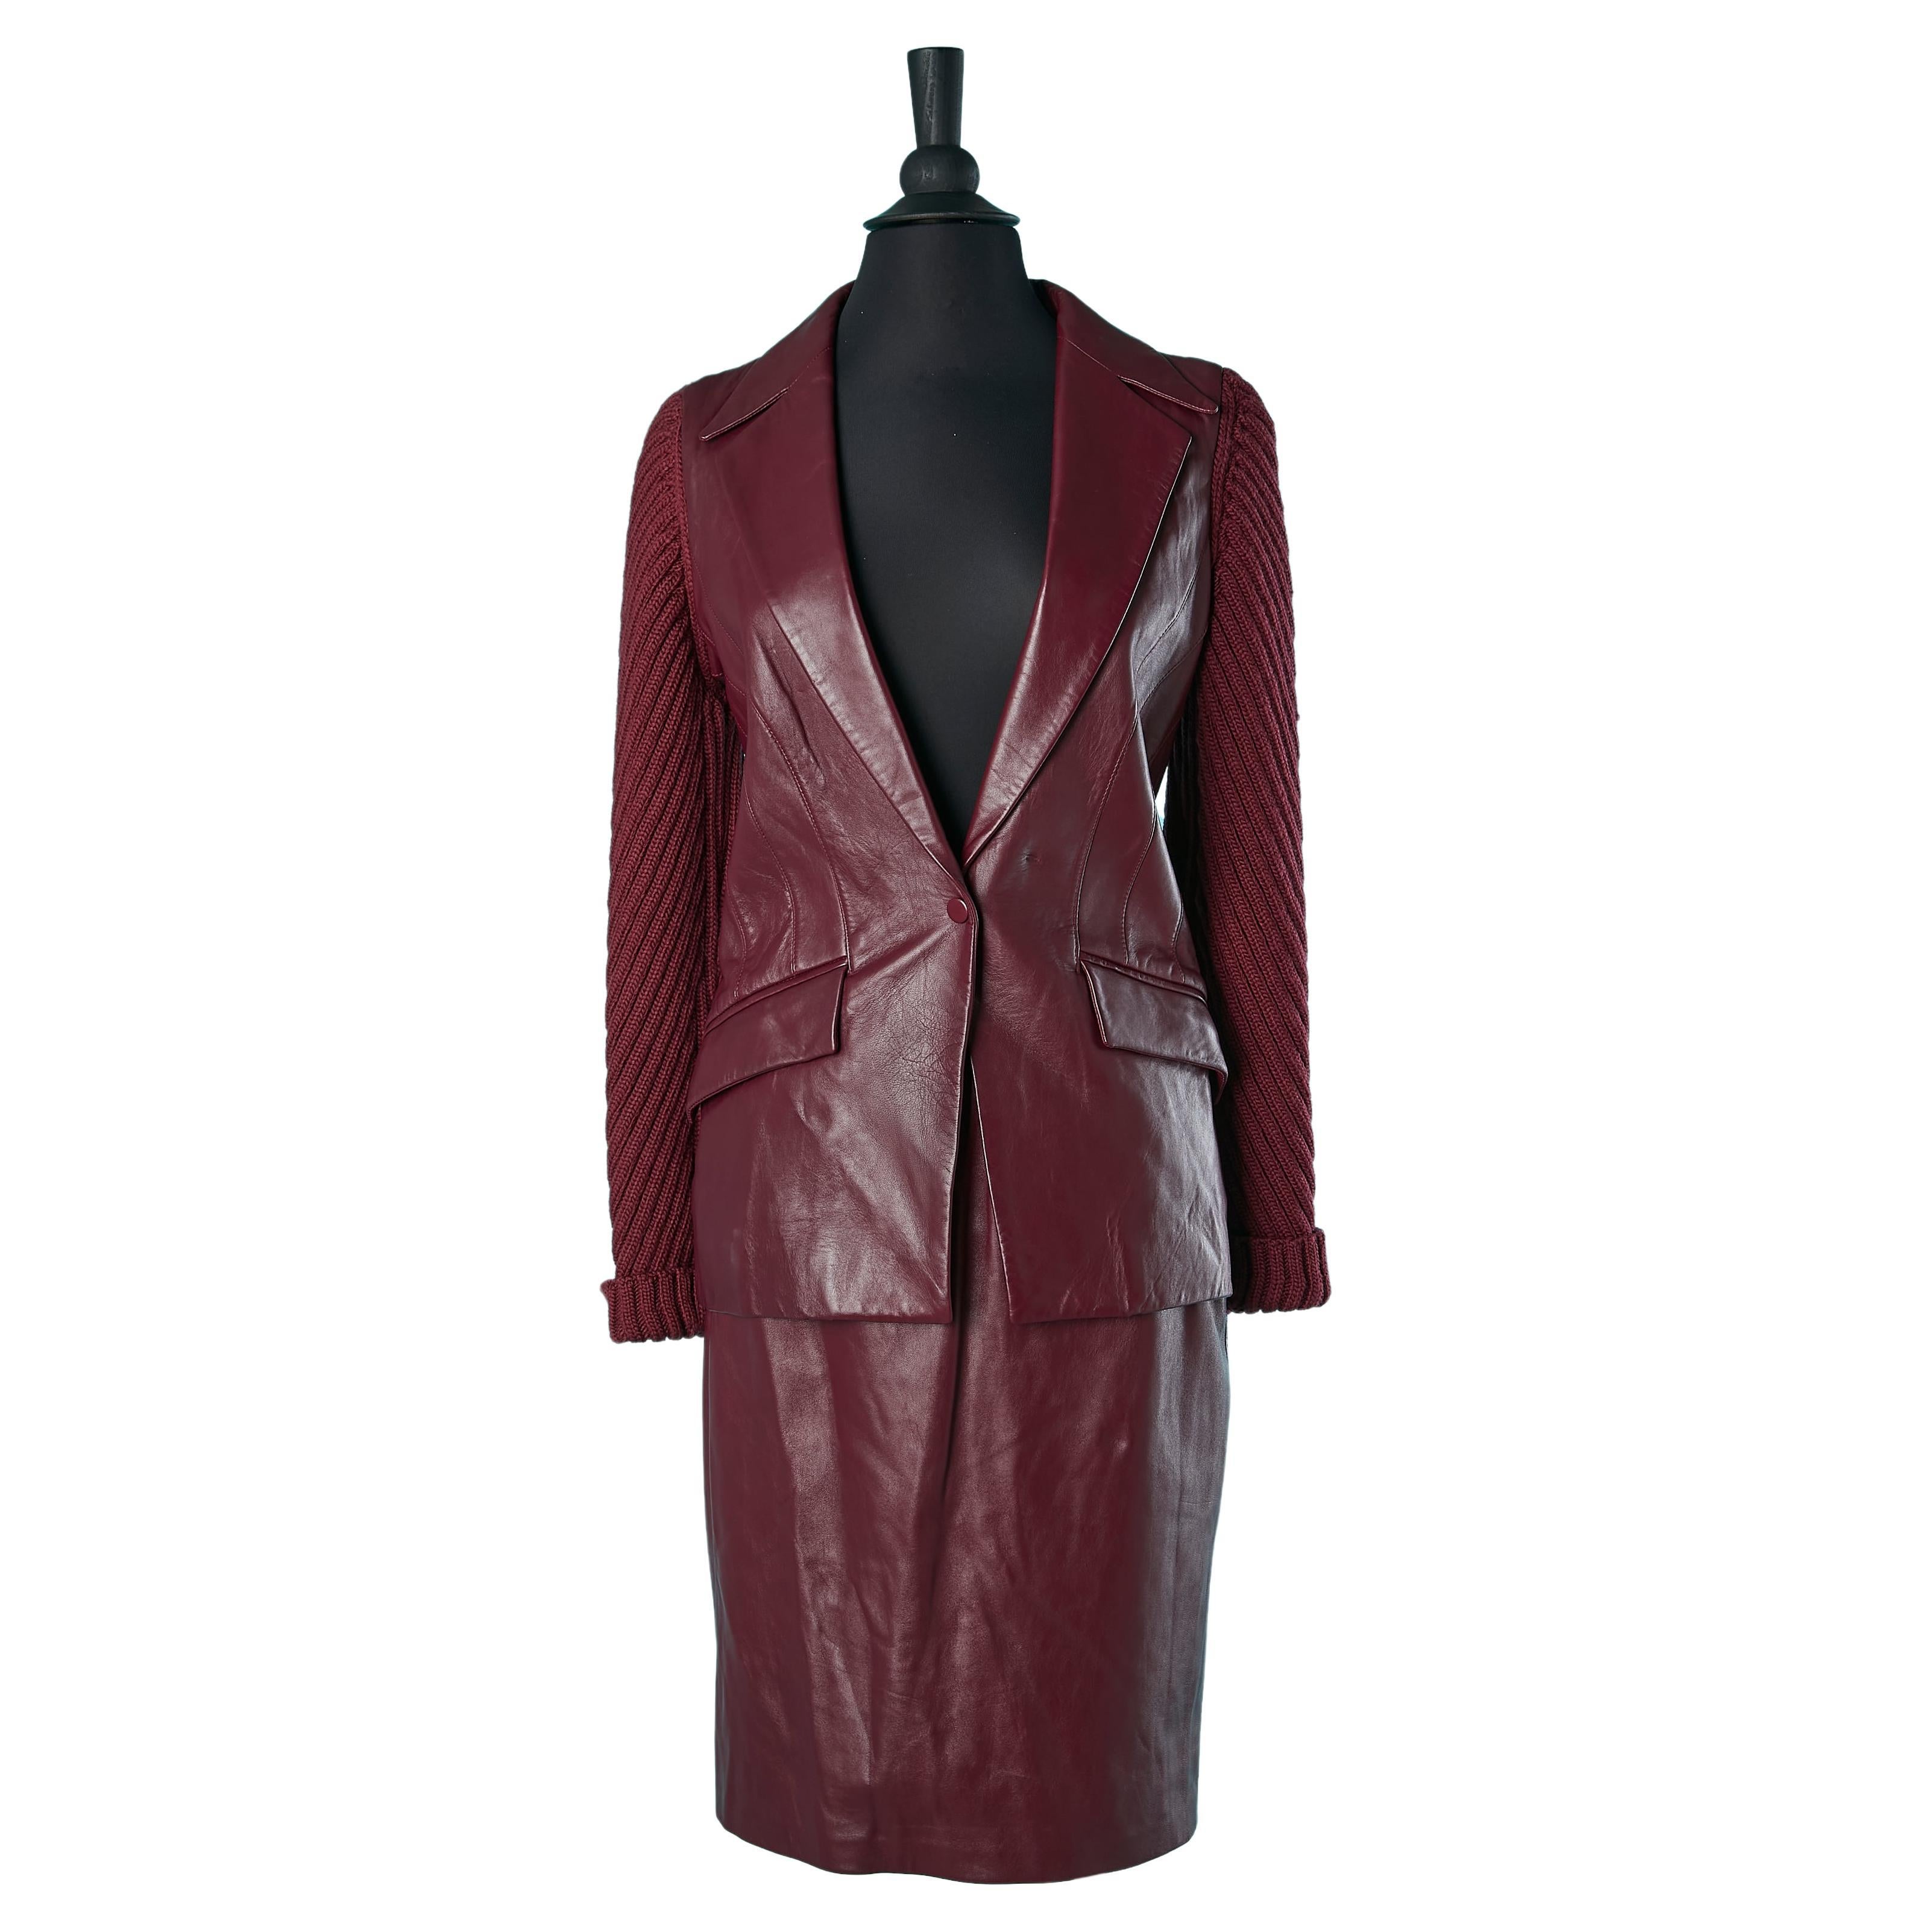 Burgundy skirt-suit in wool knit and leather MUGLER Circa 1990's  For Sale